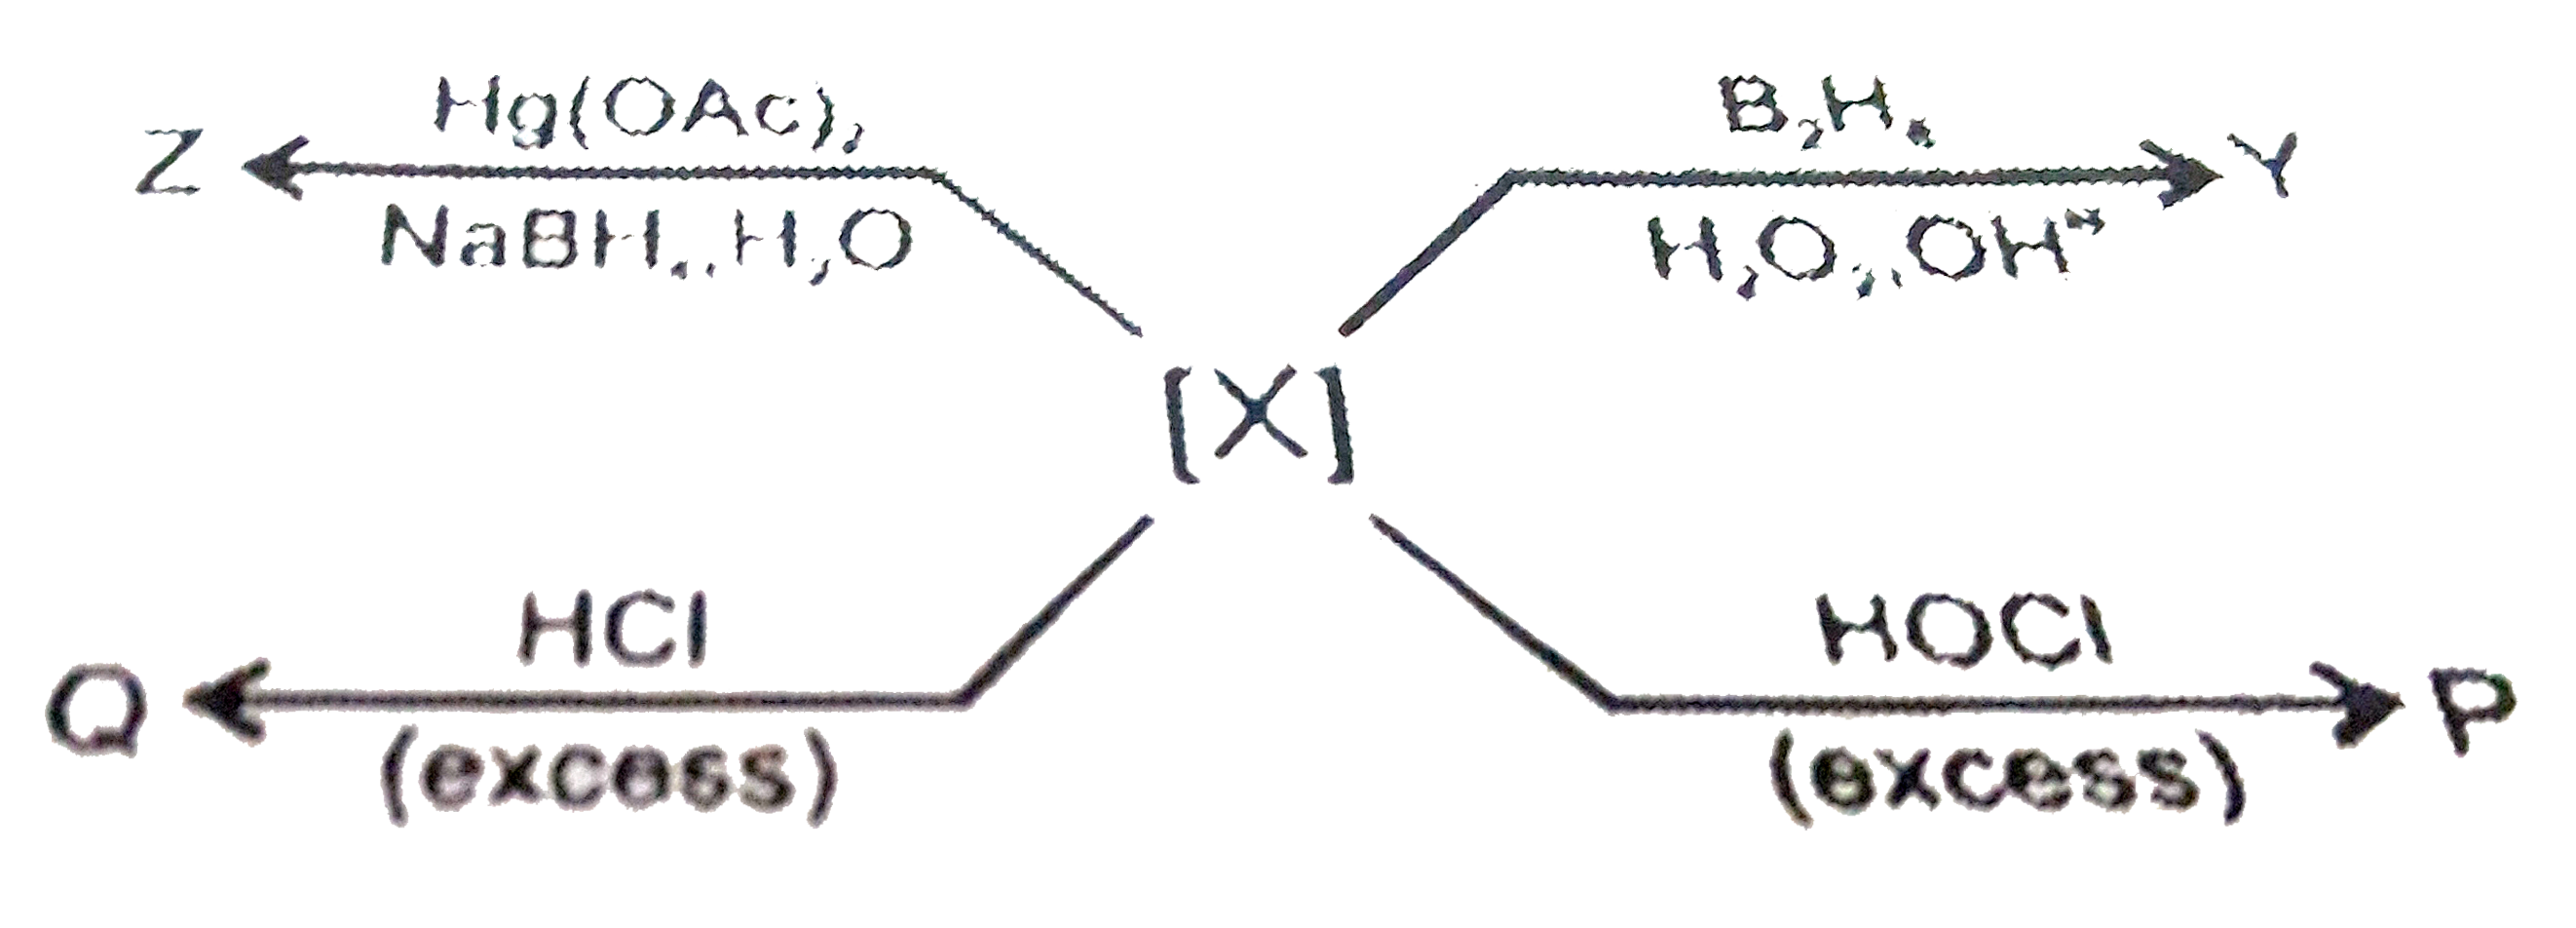 A Hydrocarbon X (M.F.C4H6) produces an aldehyde Y through Hydrocarbon Oxidation and a ketone Z through Oxymercuration Demercuration. Y and Z are functional isomers. X gives P when treated with excess of HOCl and Q when treated with excess of HCl.     The structure of X is :